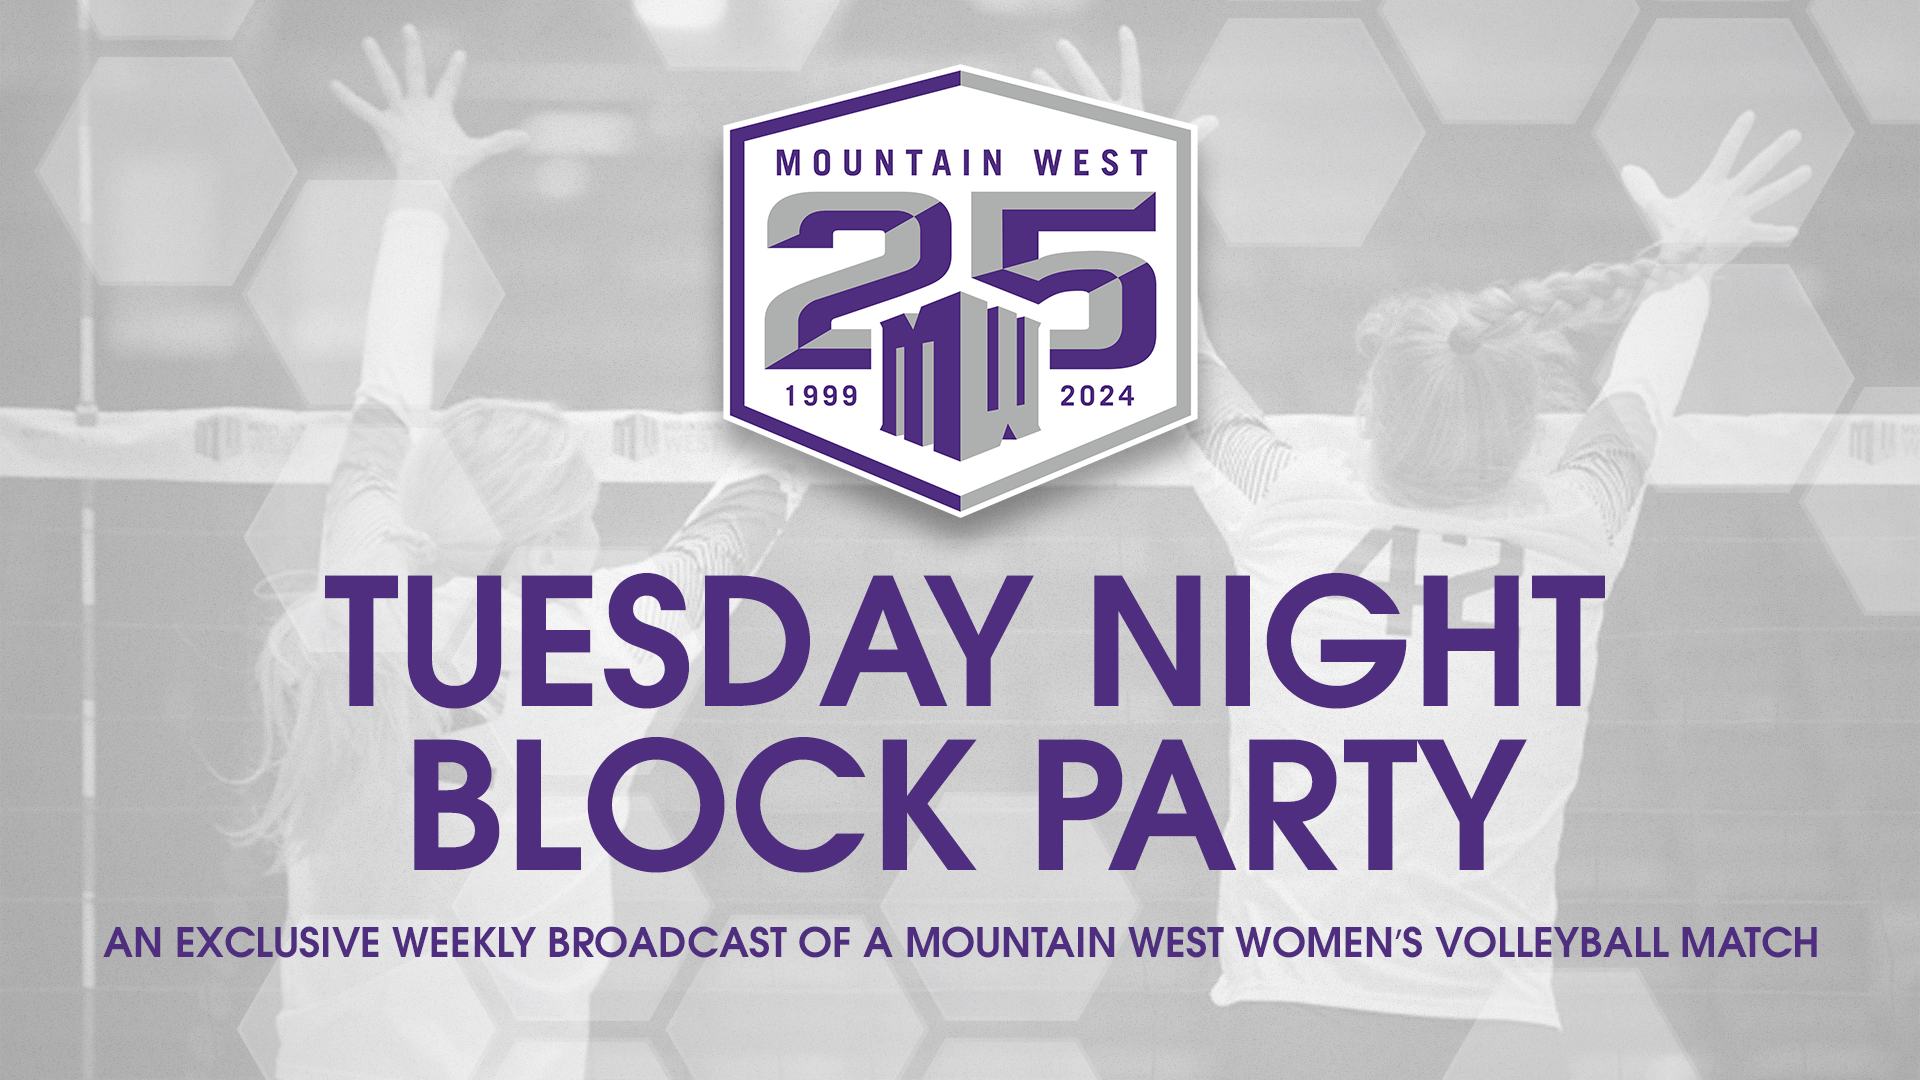 Mountain West Announces Tuesday Night Block Party